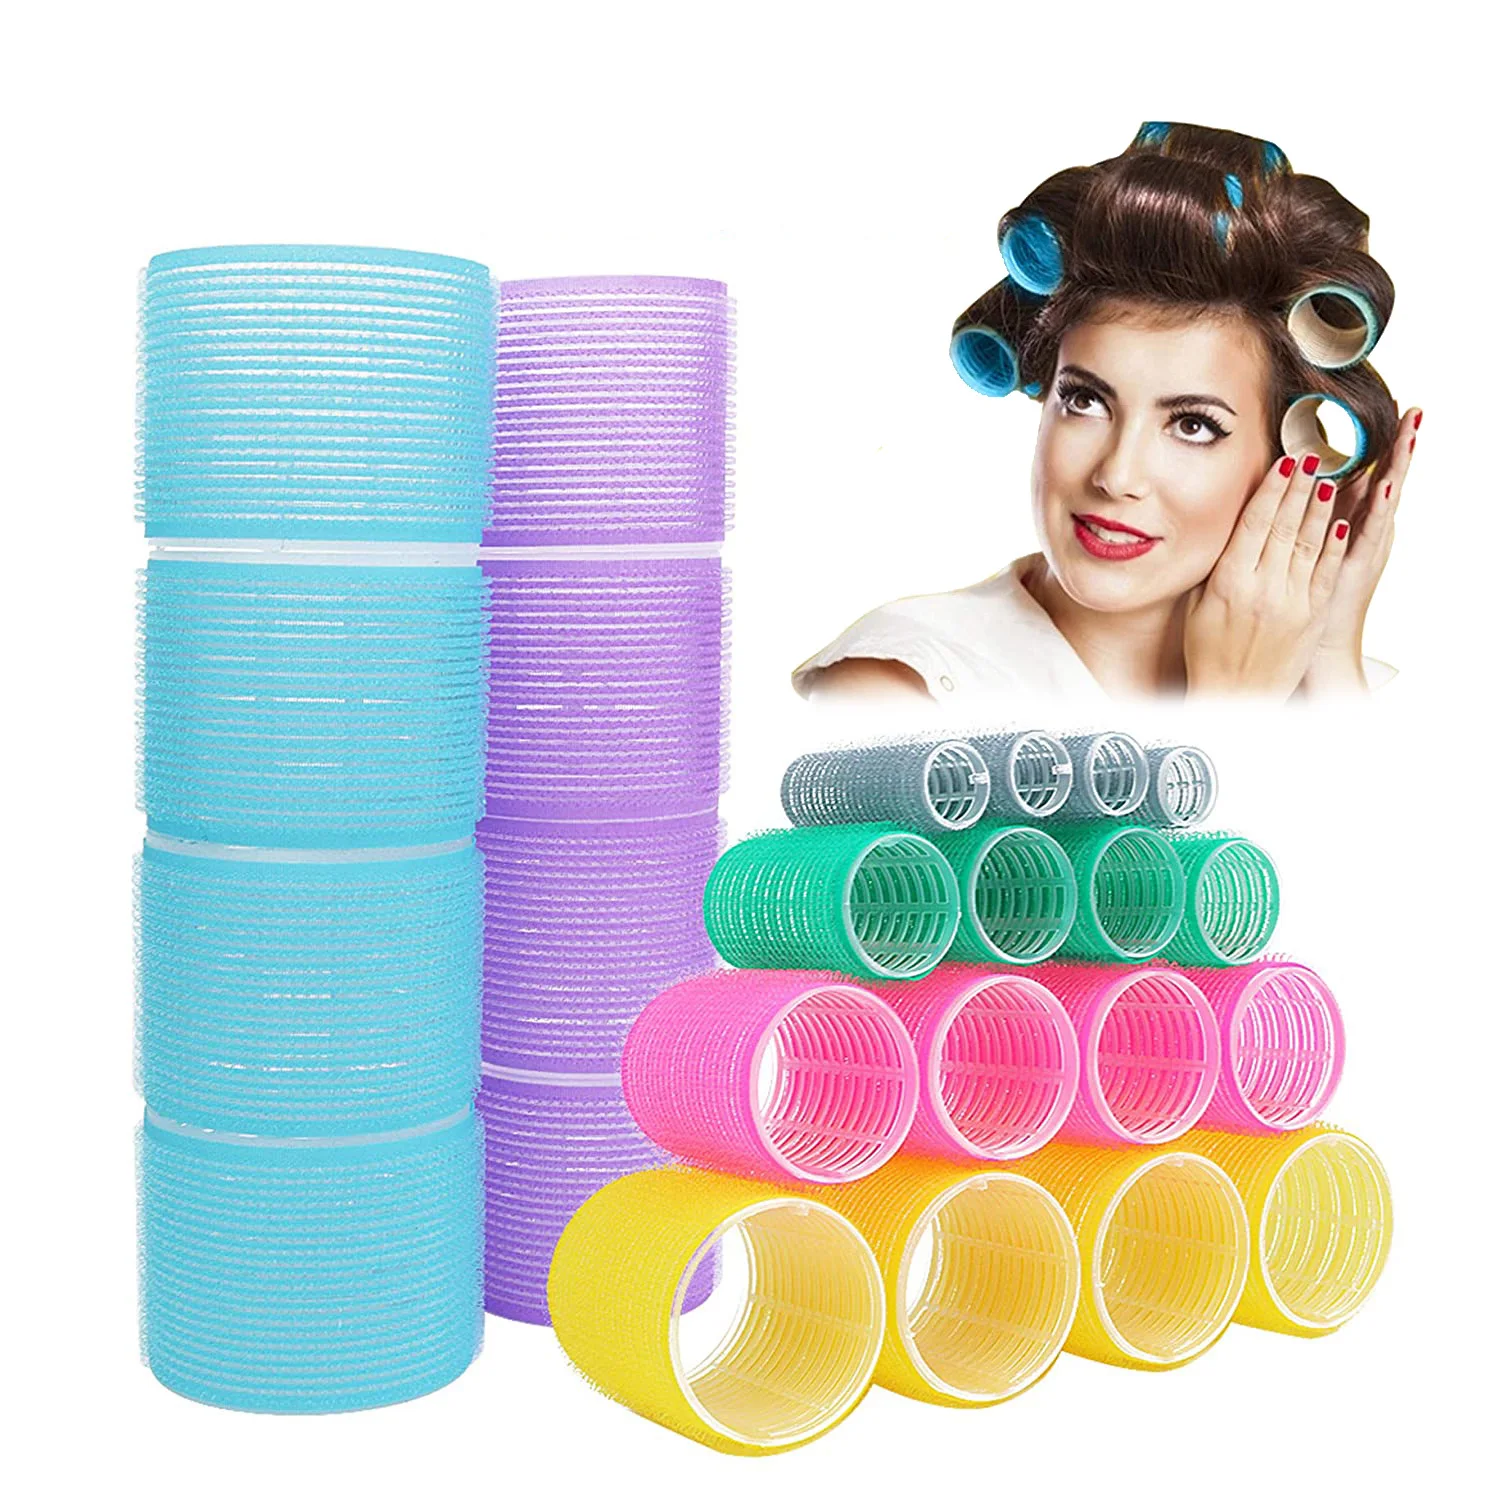 Jumbo Hair Rollers Set 6Pcs Self Grip Magic Hair Curlers Different Size No Heat Self-adhesive Curling Hairdressing Styling Tool